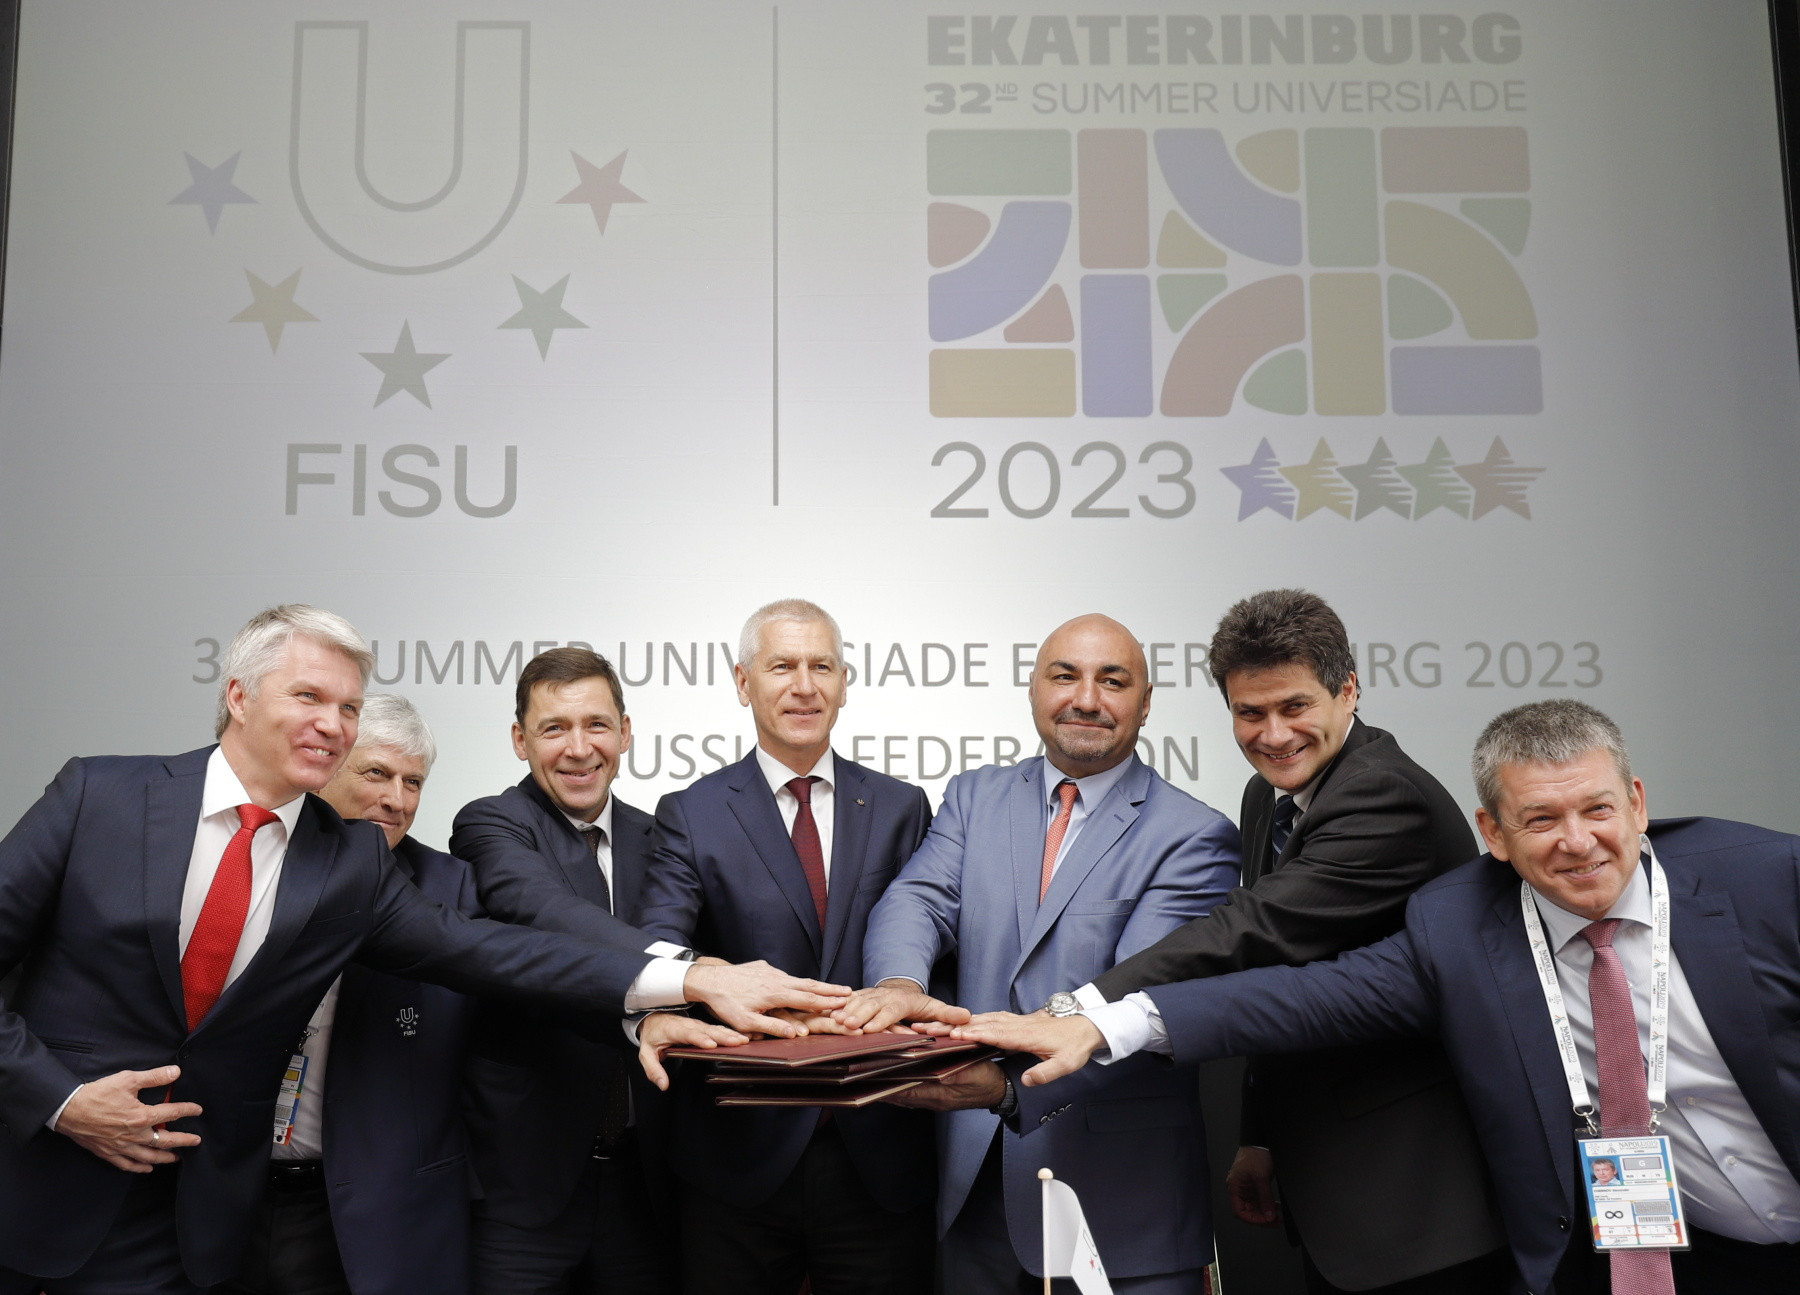 The decision by FISU to ban Russia and Belarus leaves a major question mark over whether Yekaterinburg will be able to host next year's Summer World University Games ©FISU